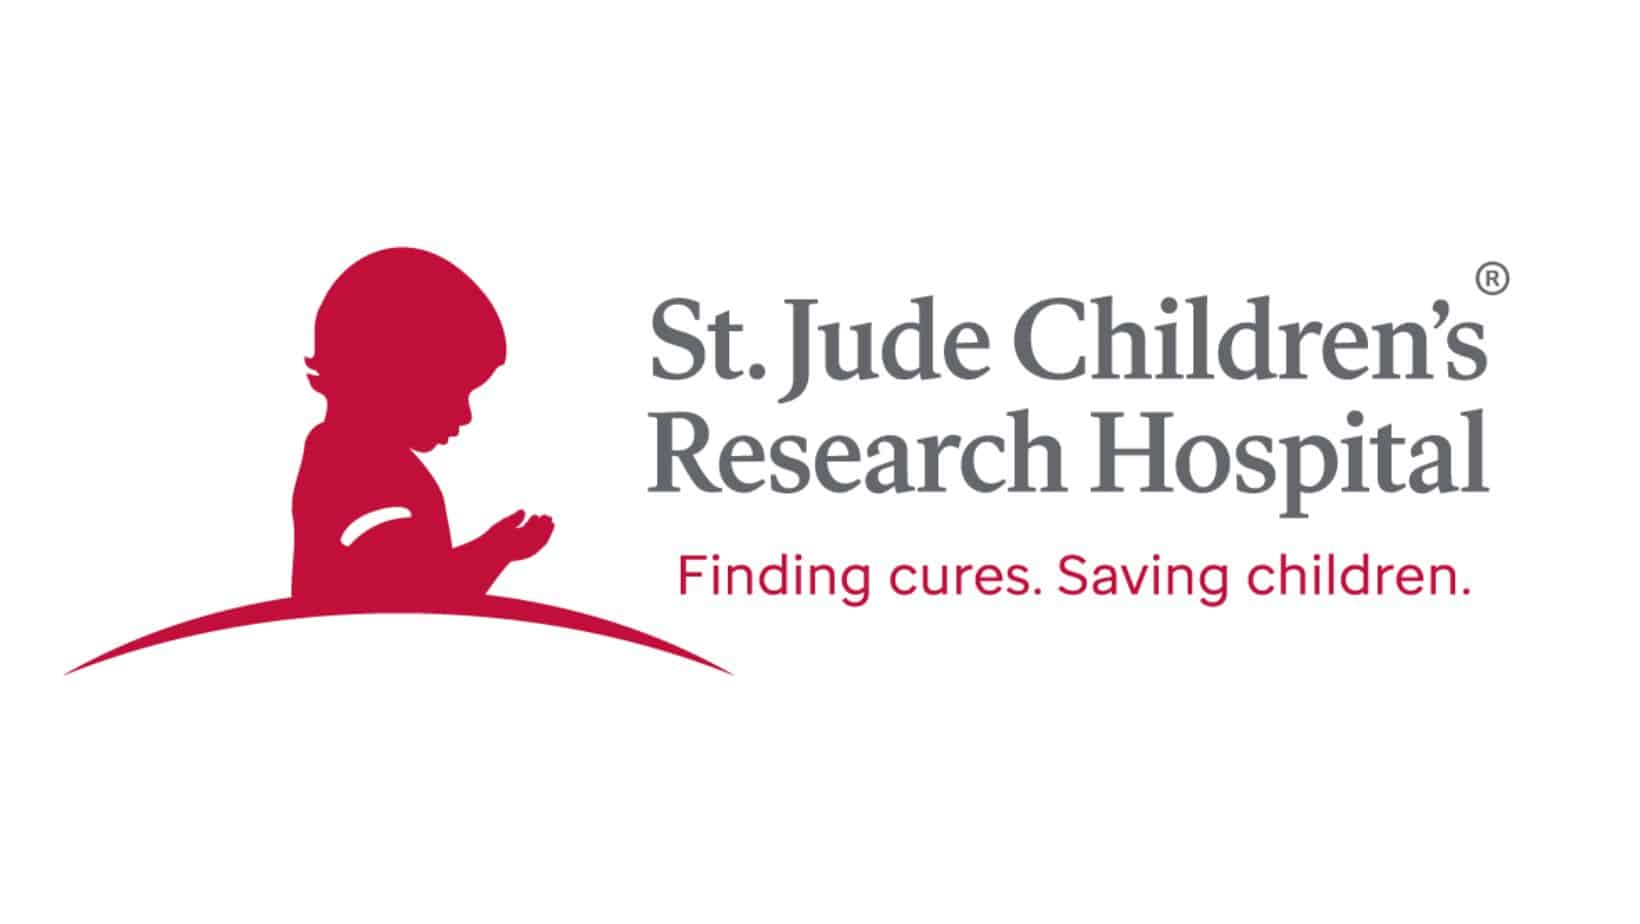 Dental365 makes a positive impact with a generous donation to St.Jude Children’s Research Hospital